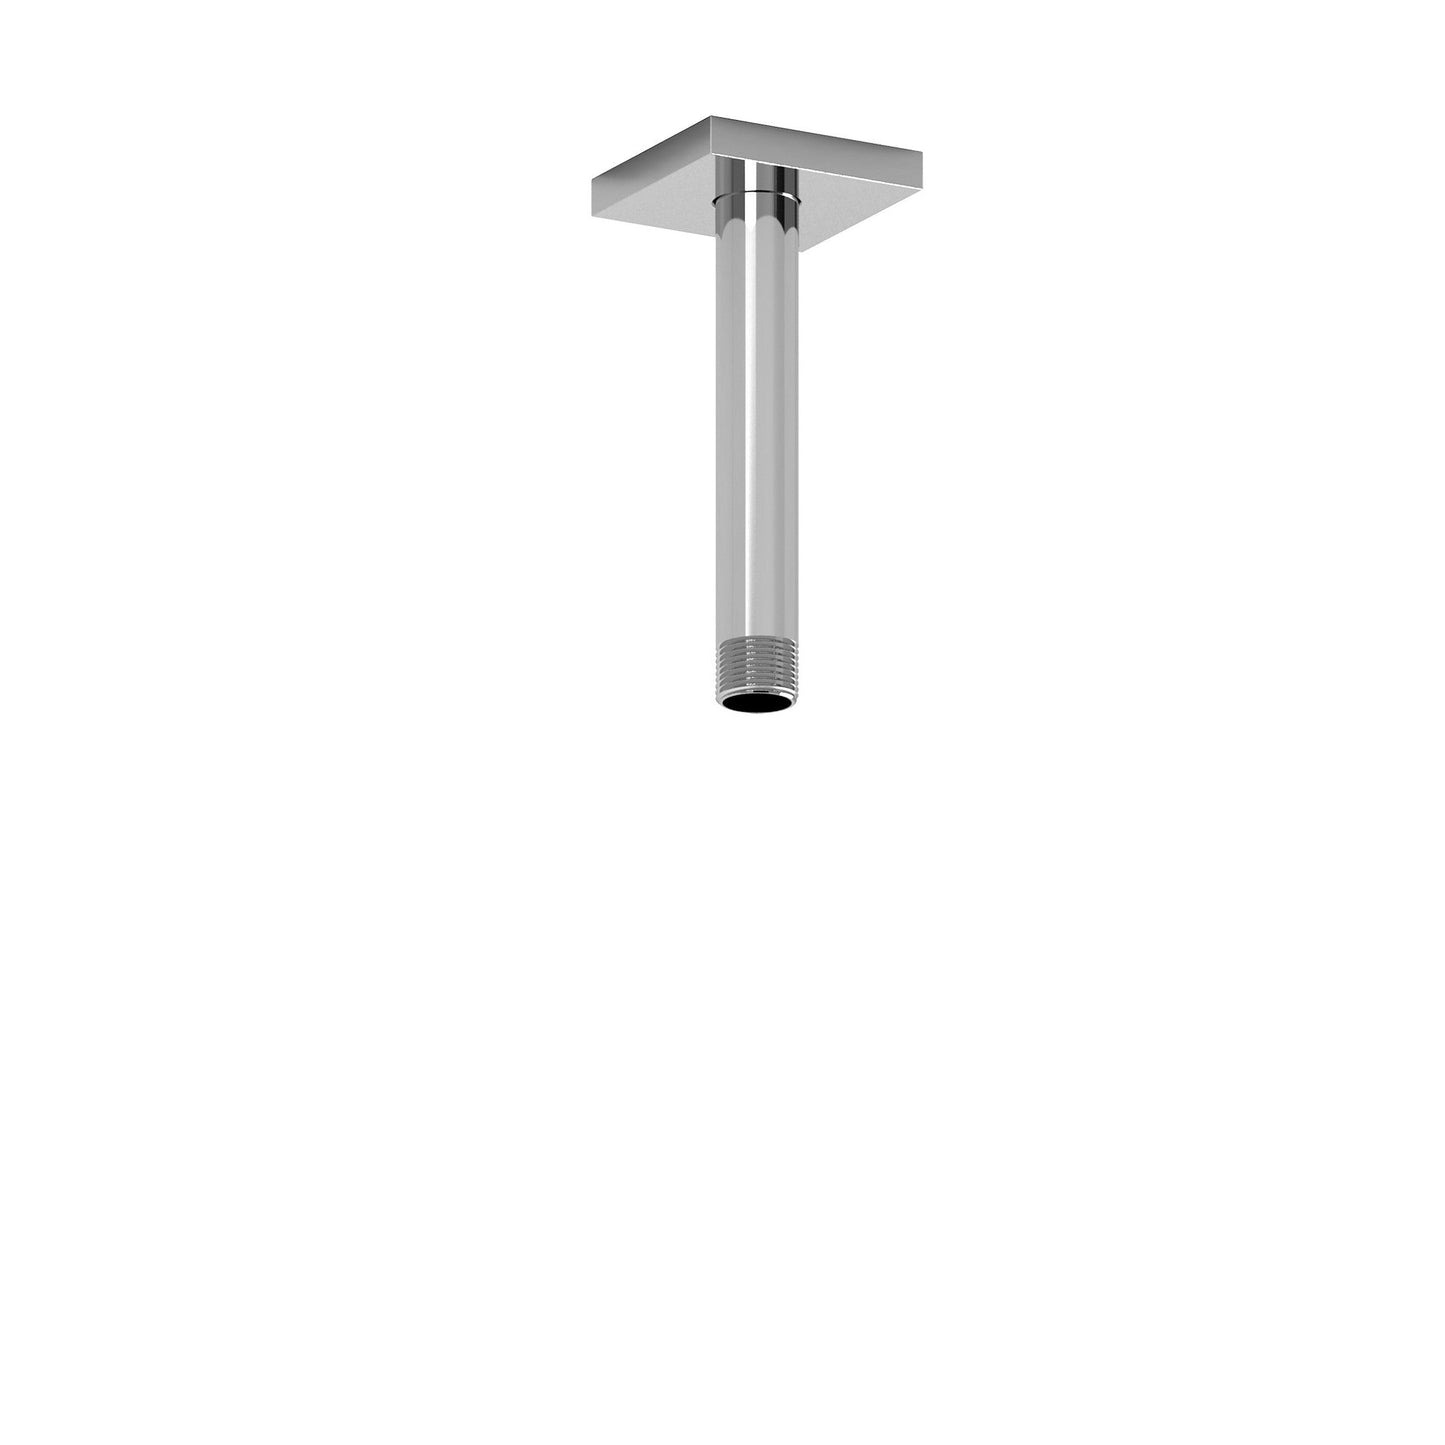 Riobel 6" Transitional Ceiling Mount Shower Arm With Square Escutcheon- Chrome